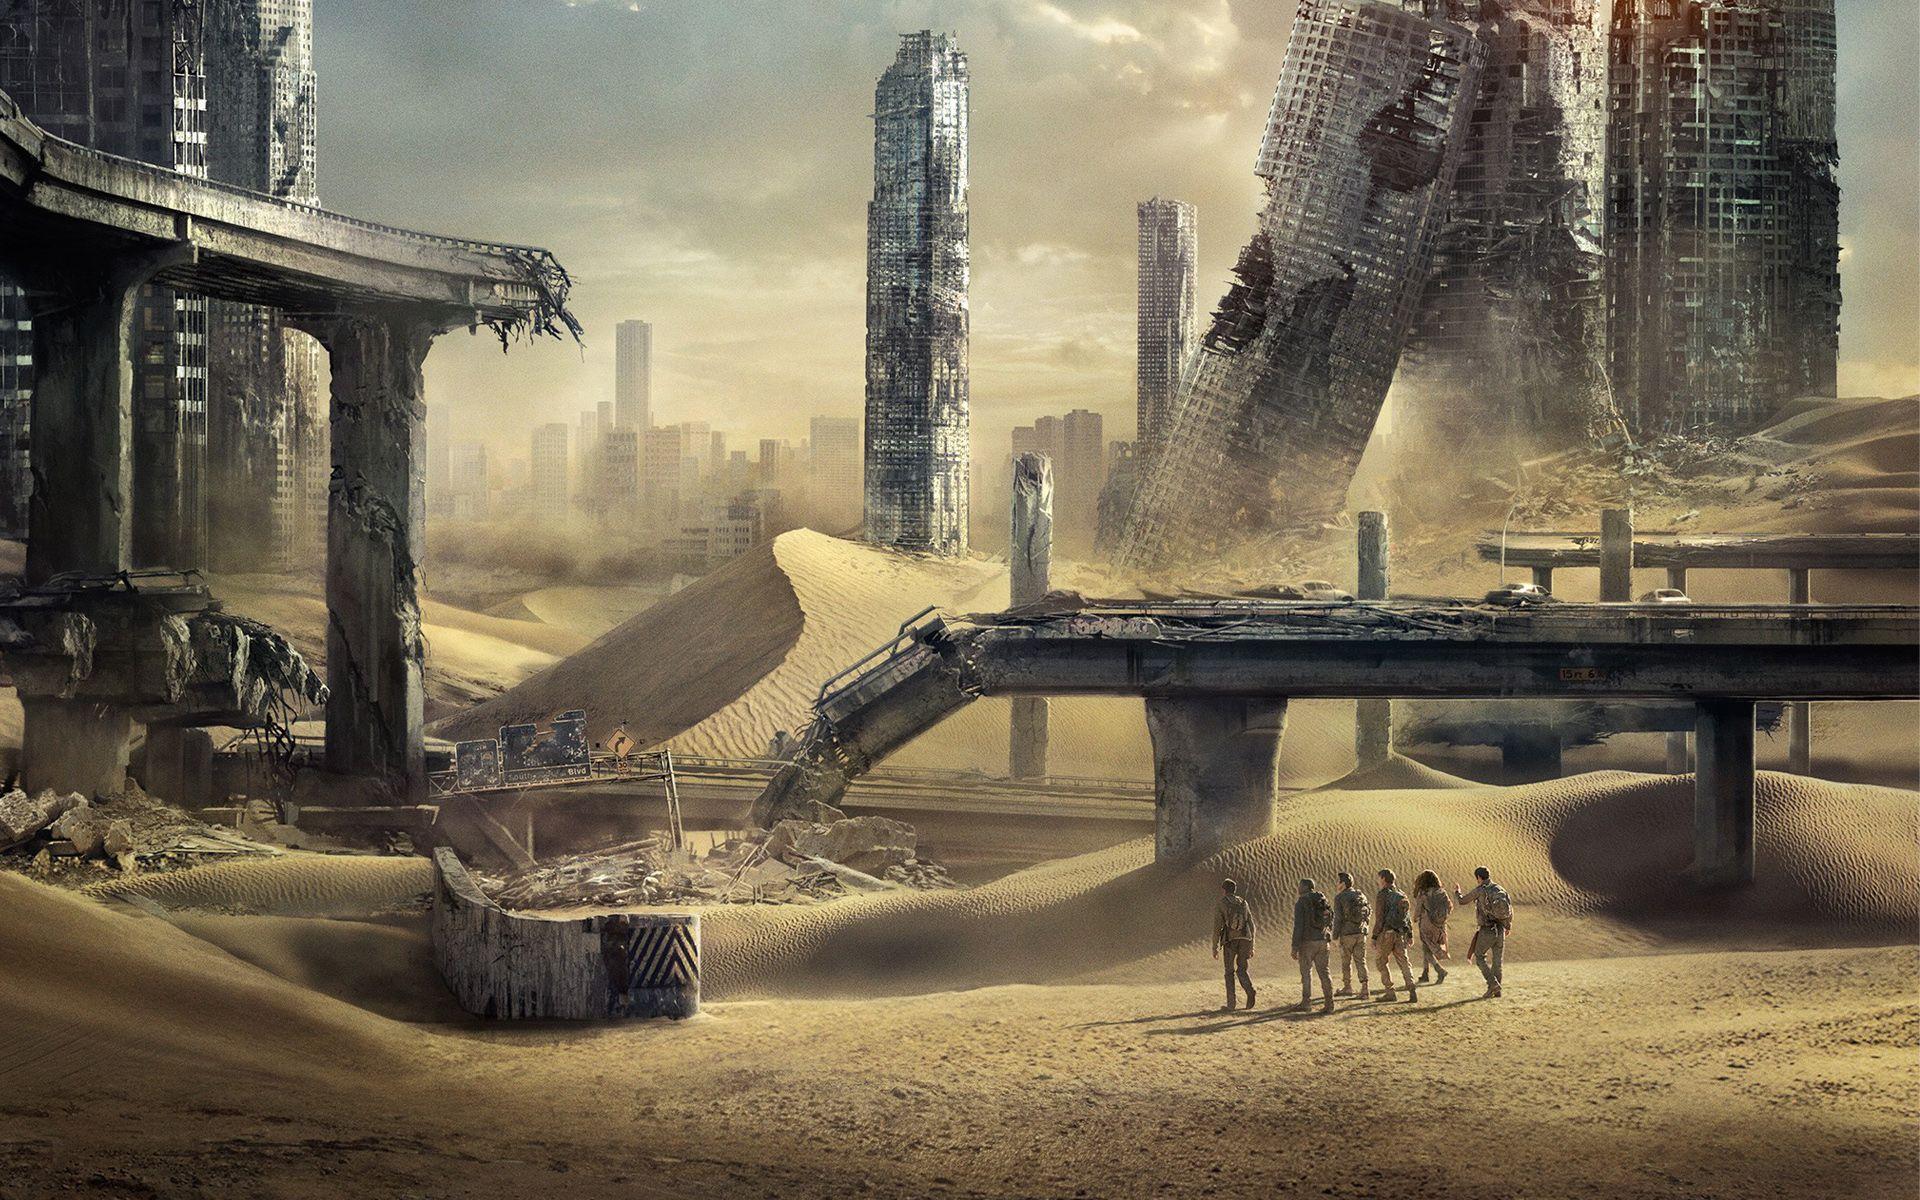 Maze Runner The Death Cure Wallpaper Background 62233 2700x1688 px